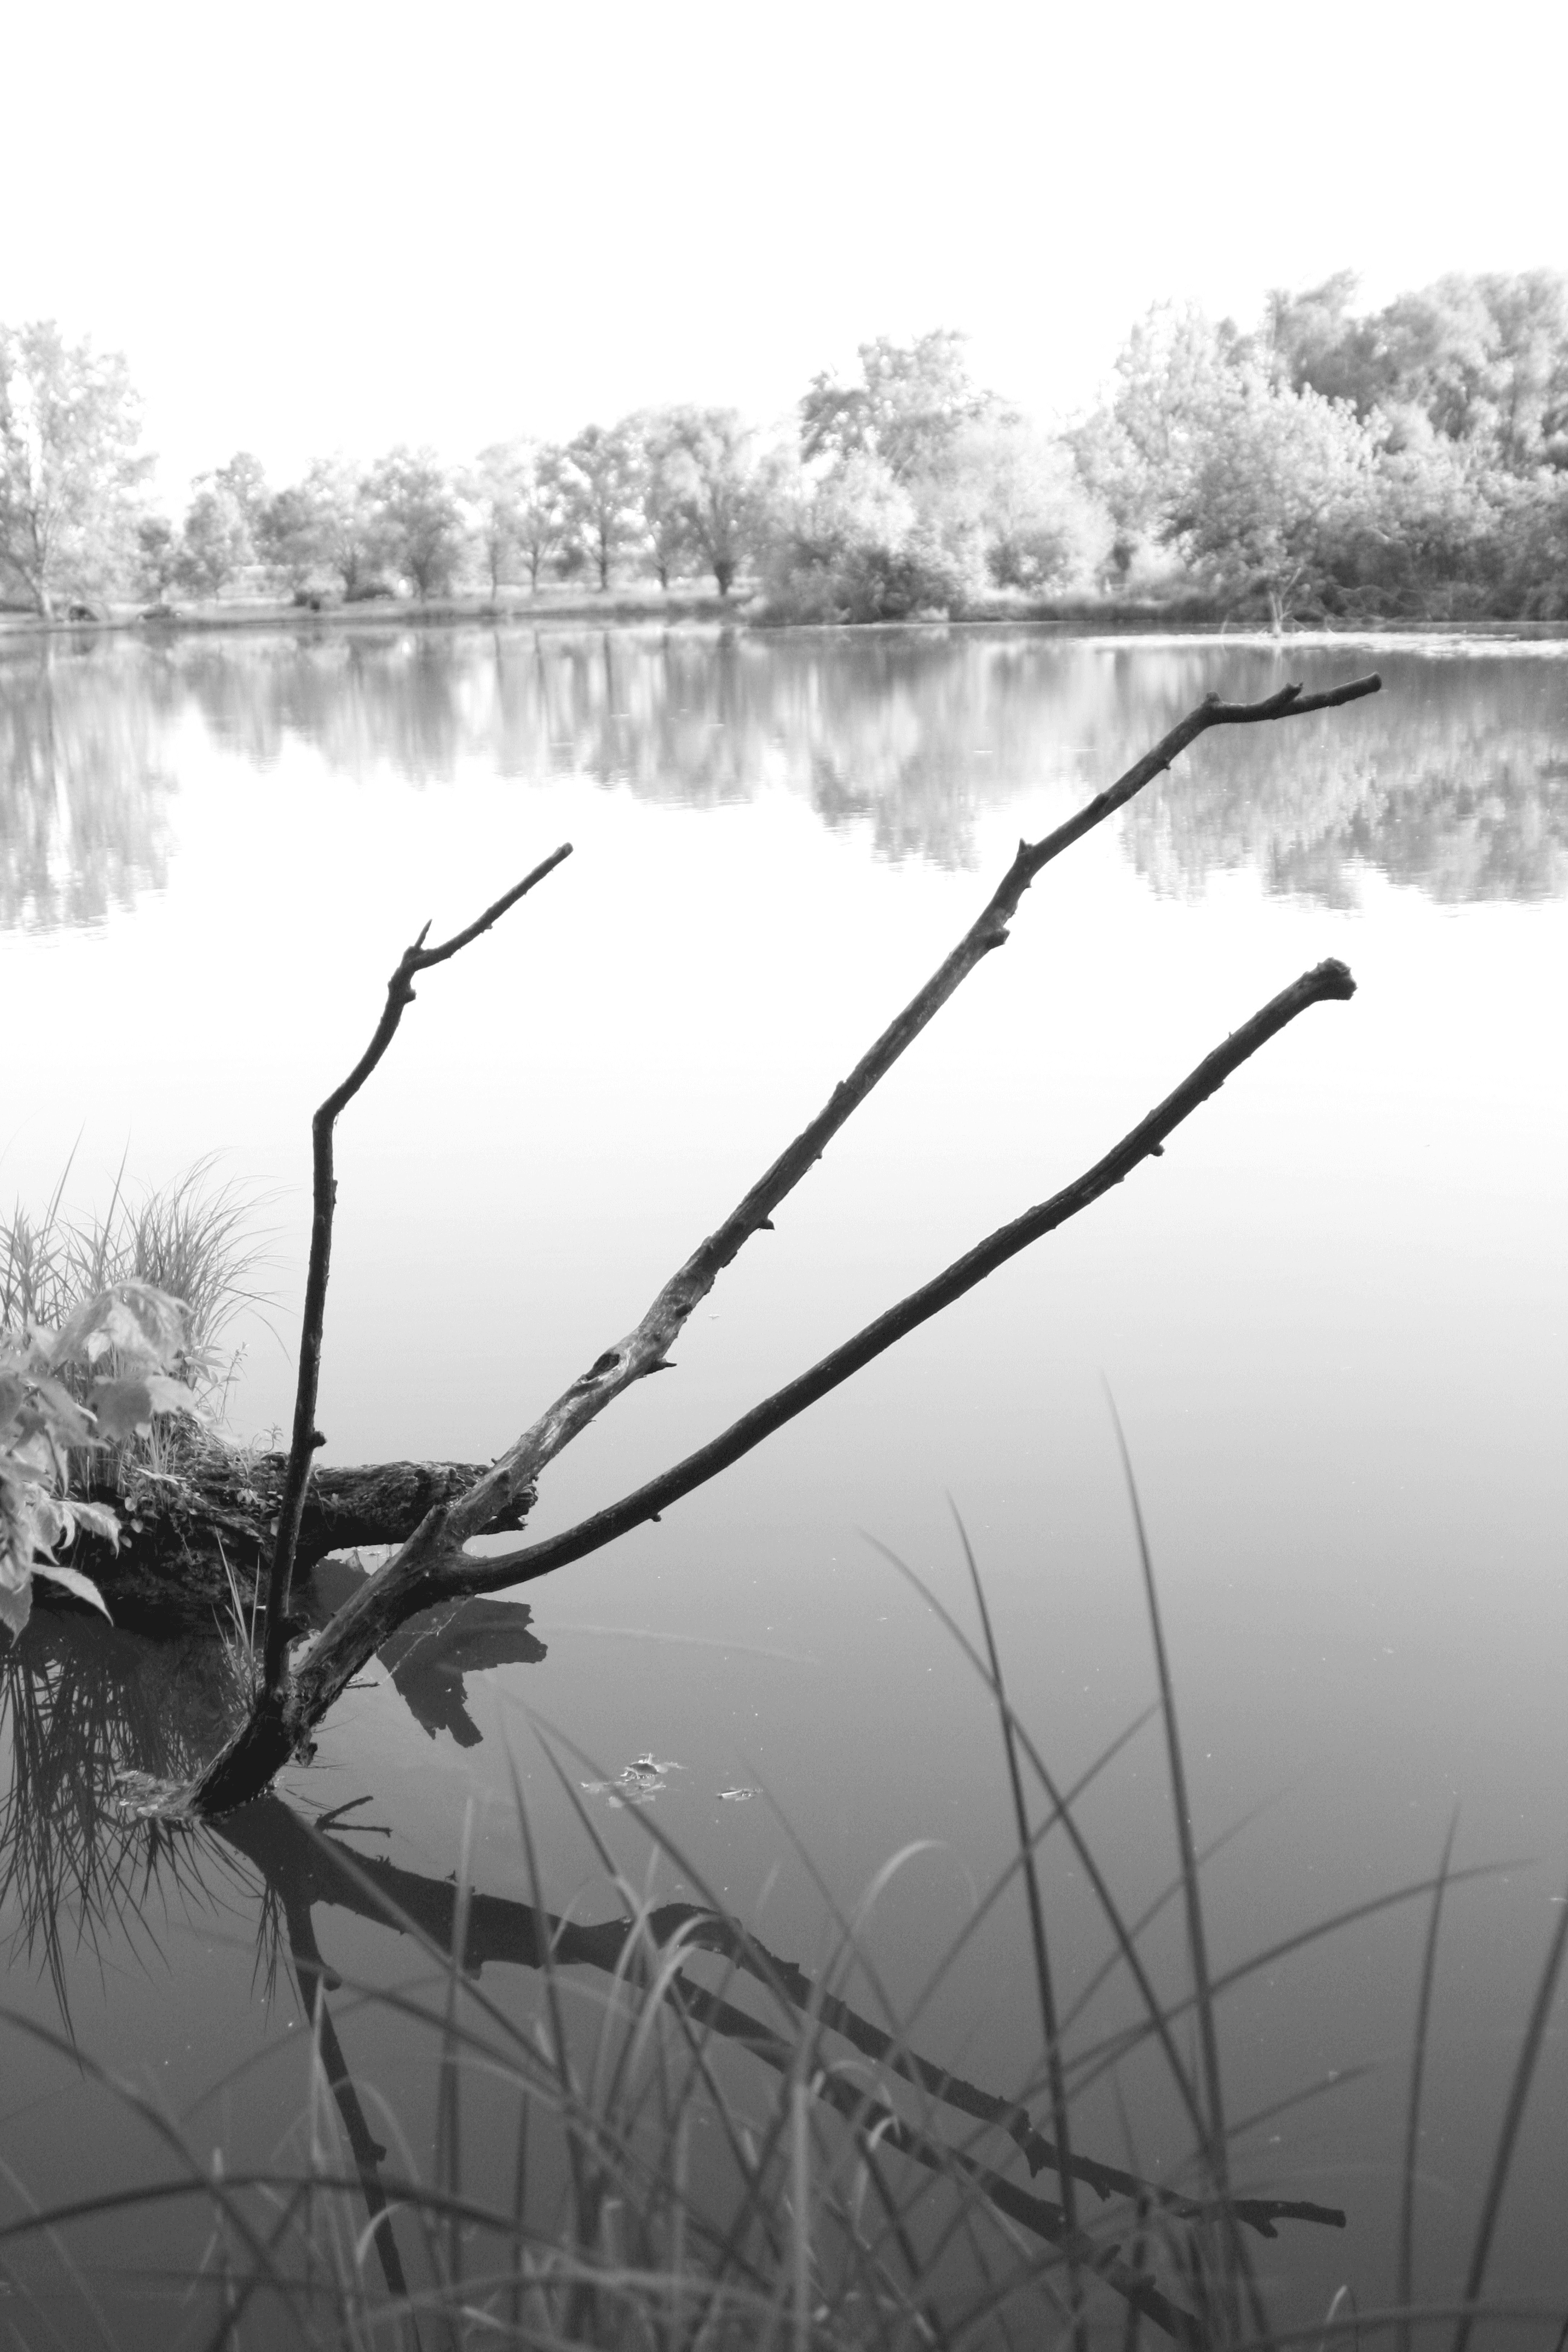 Dead tree in the lake